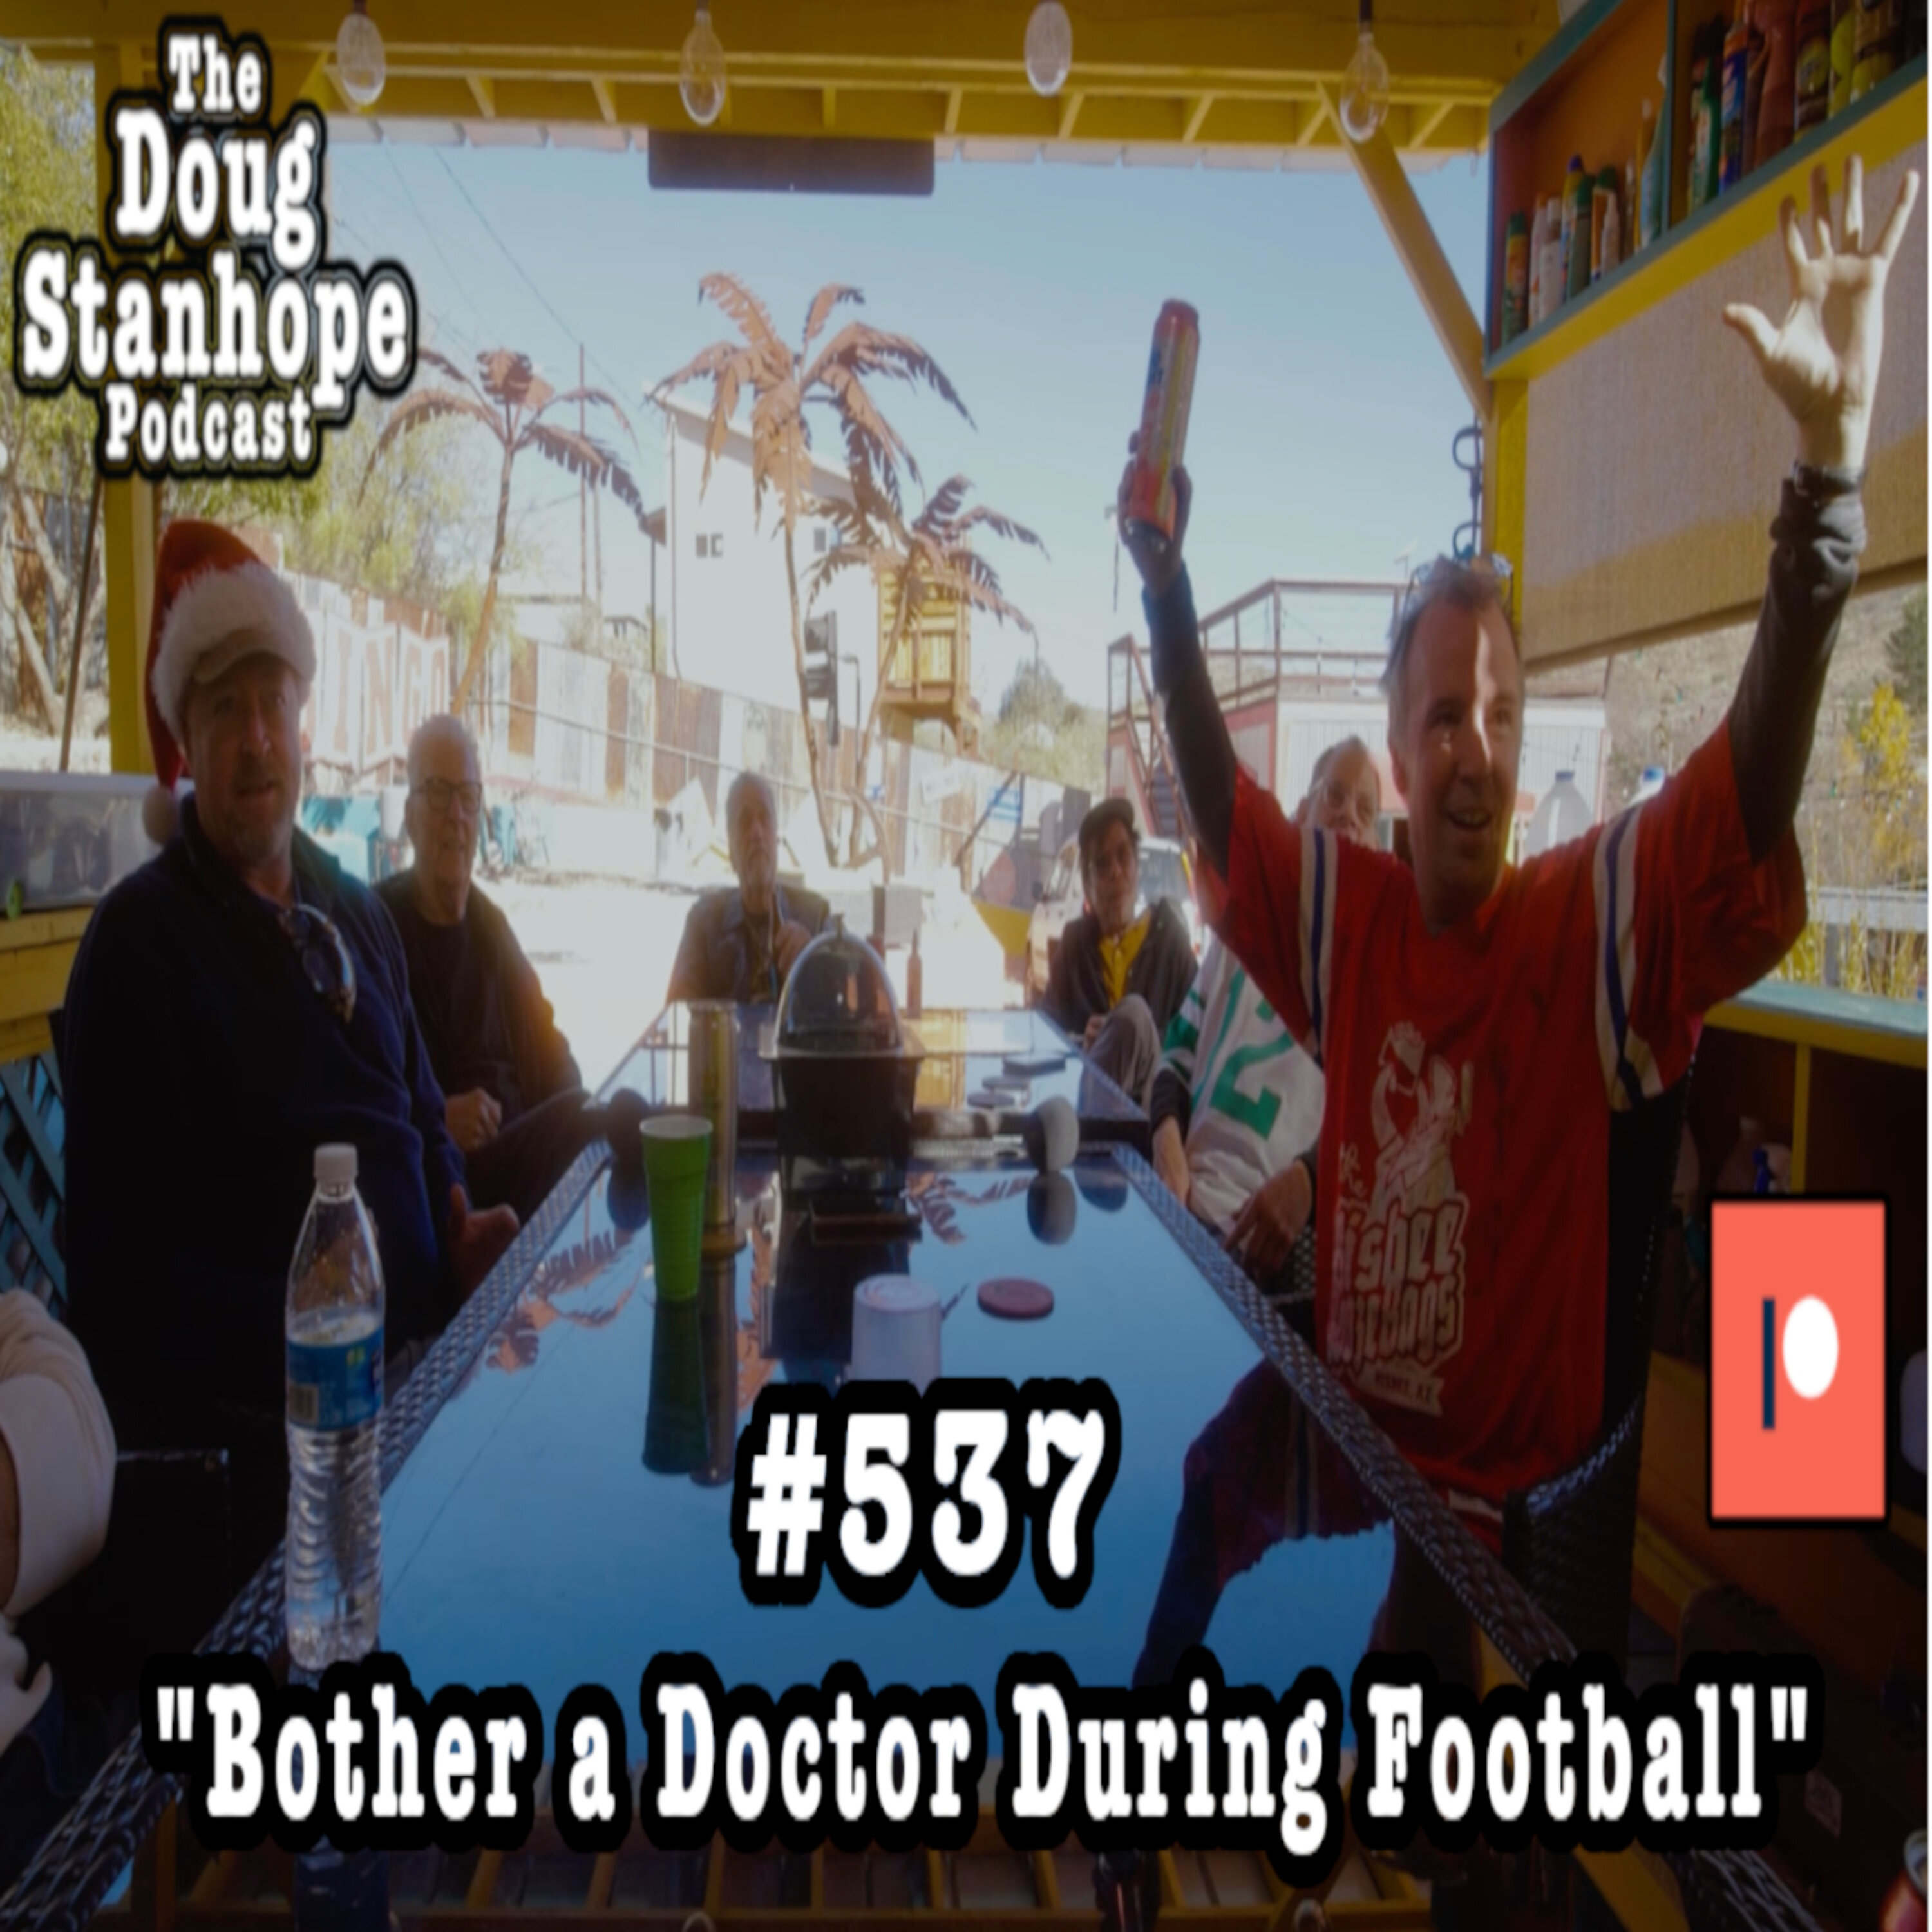 Doug Stanhope Podcast #537 - ”Bother a Doctor During Football”